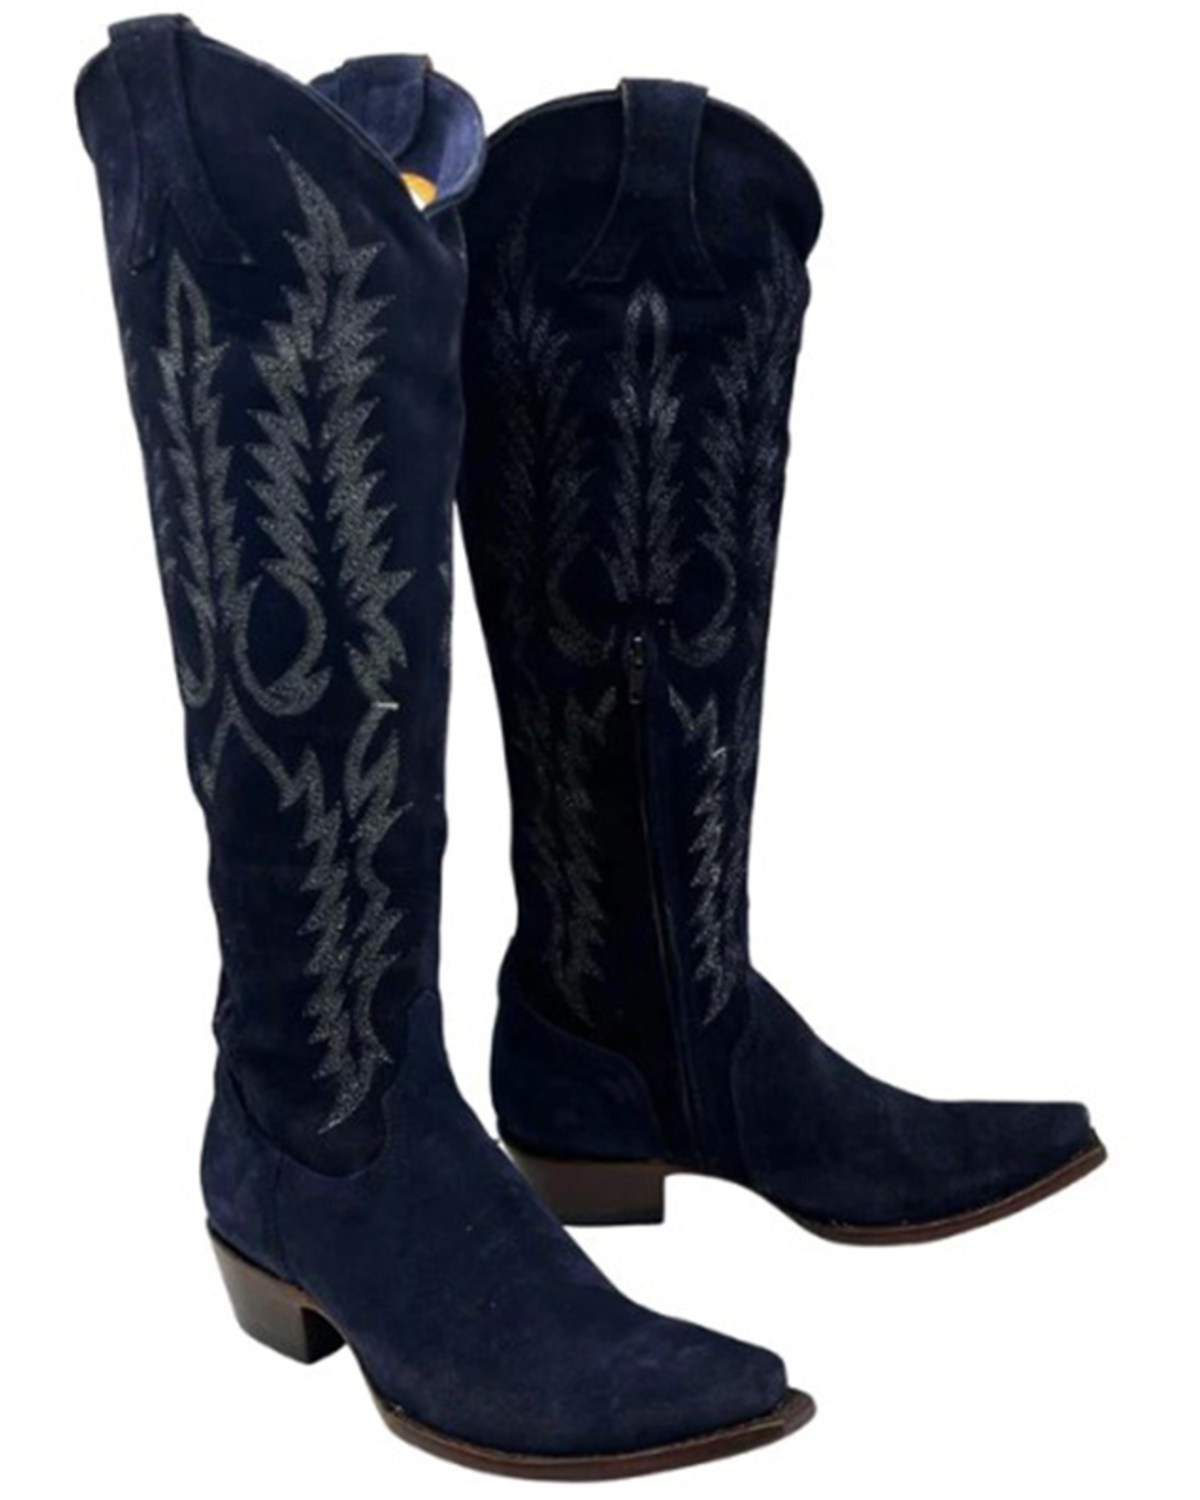 Old Gringo Women's Mayra Tall Western Boots - Snip Toe